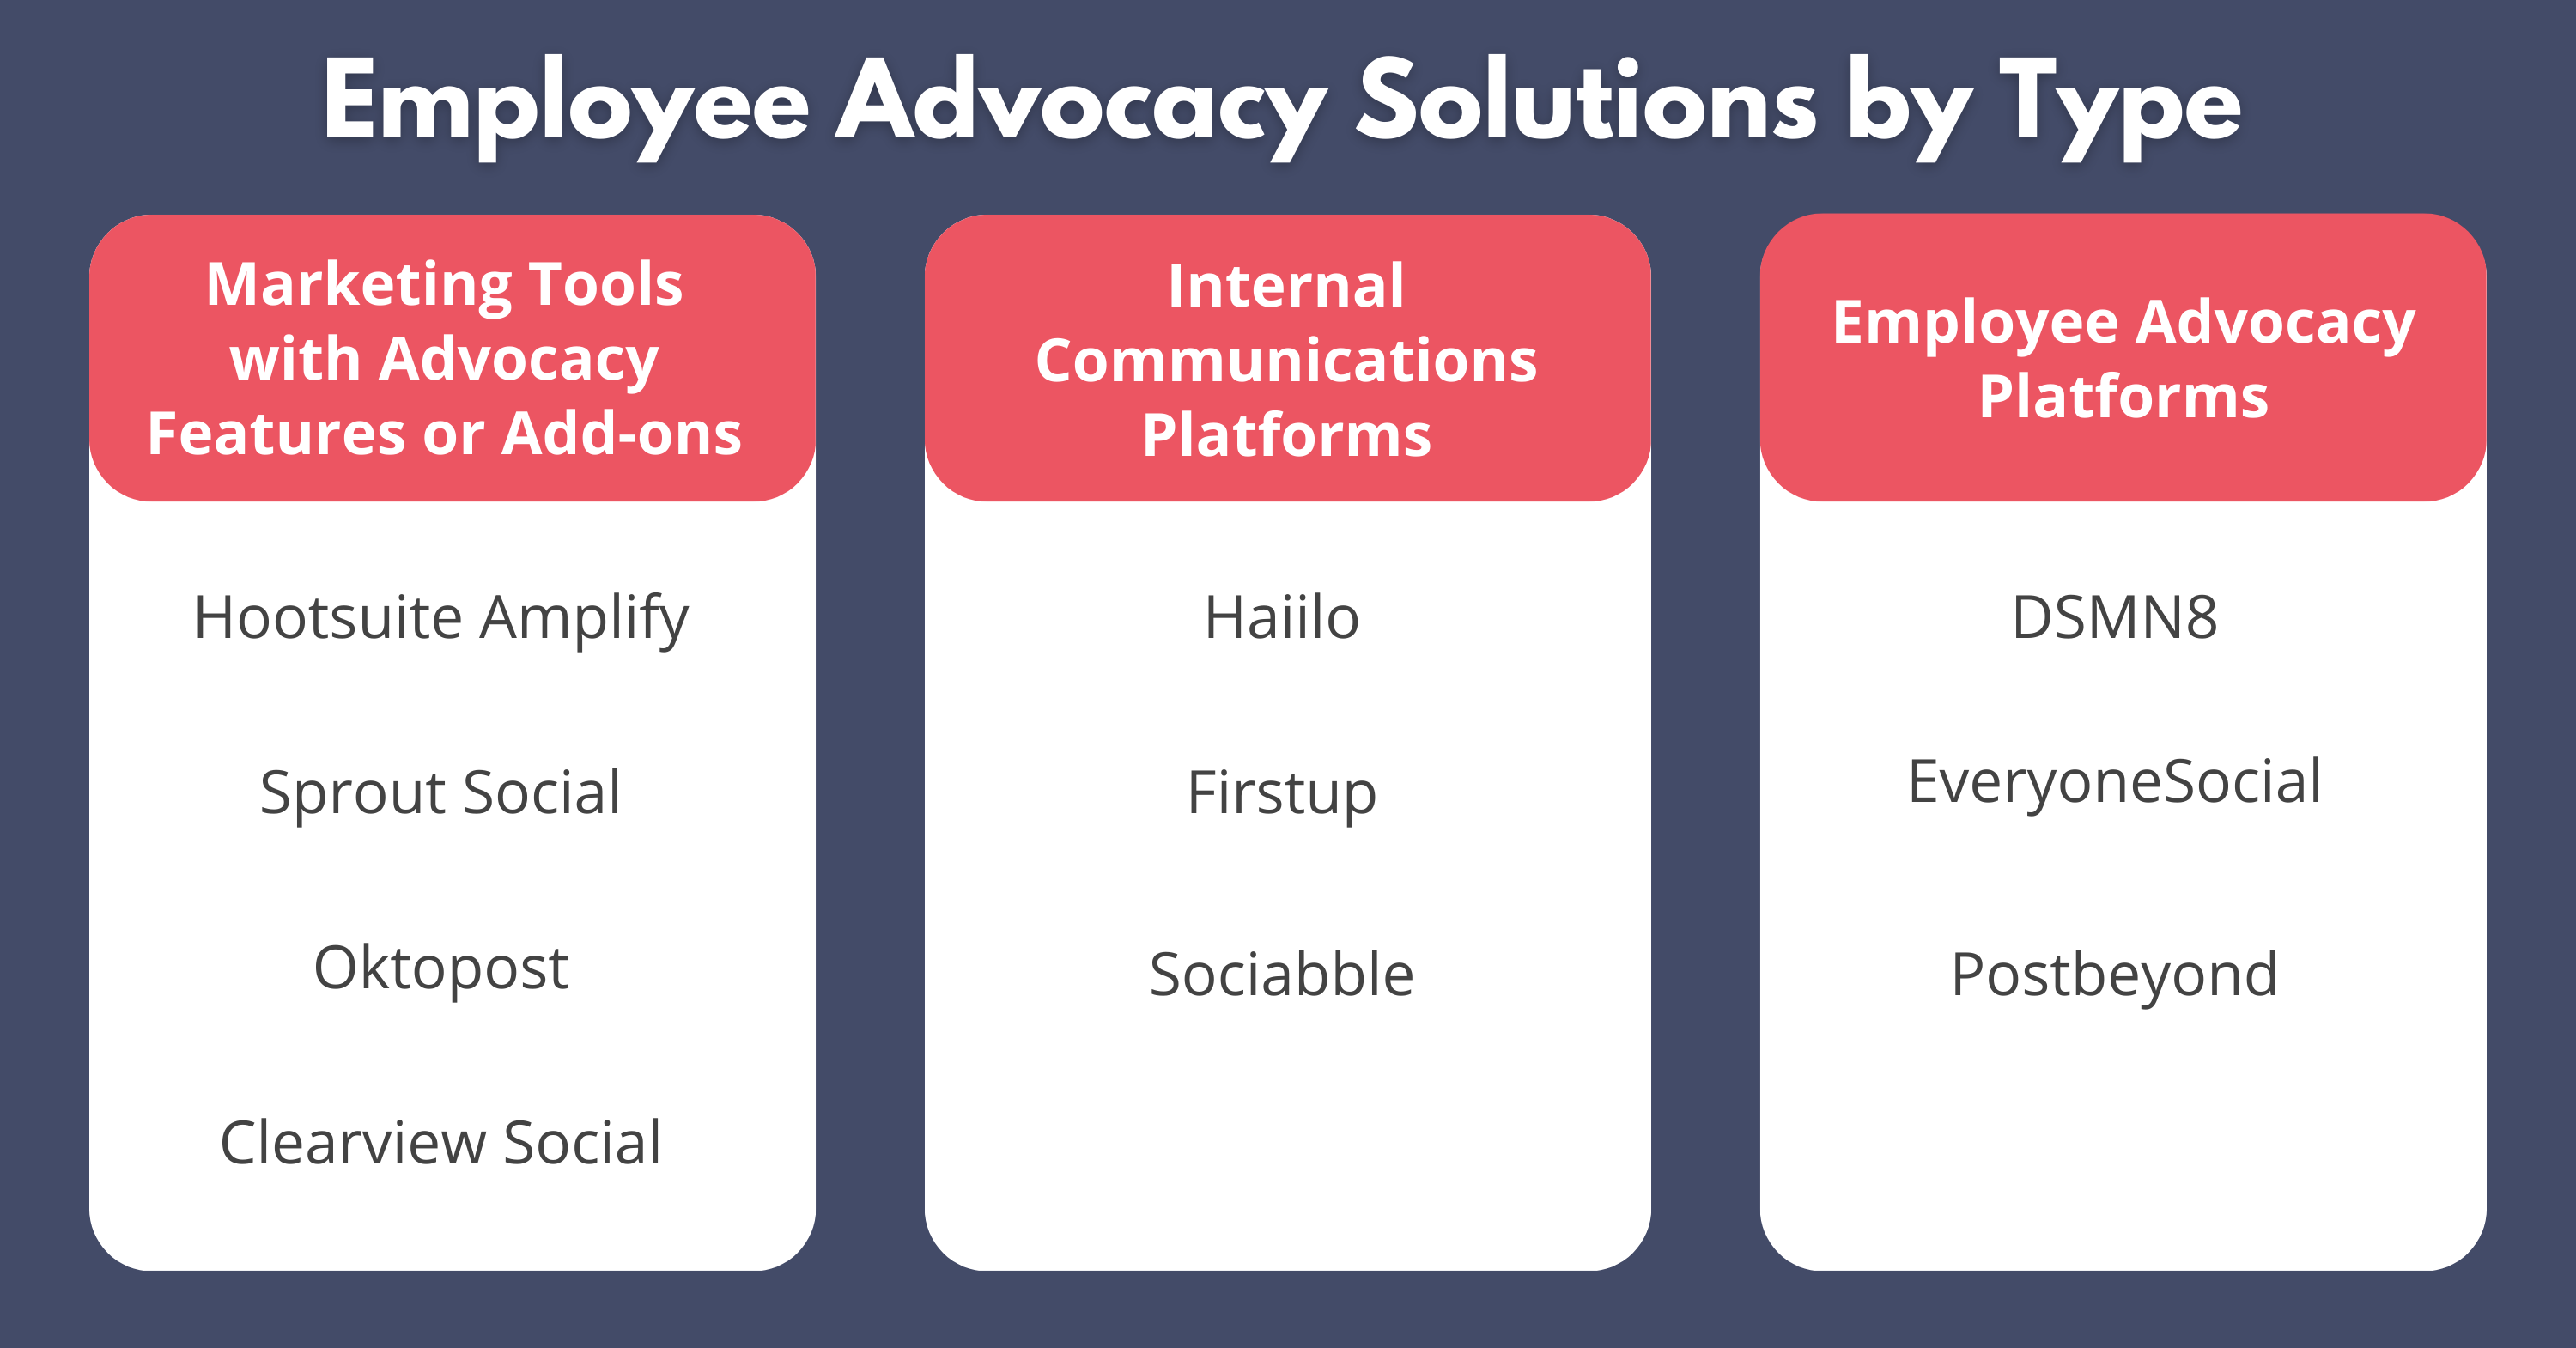 Employee advocacy solutions by type